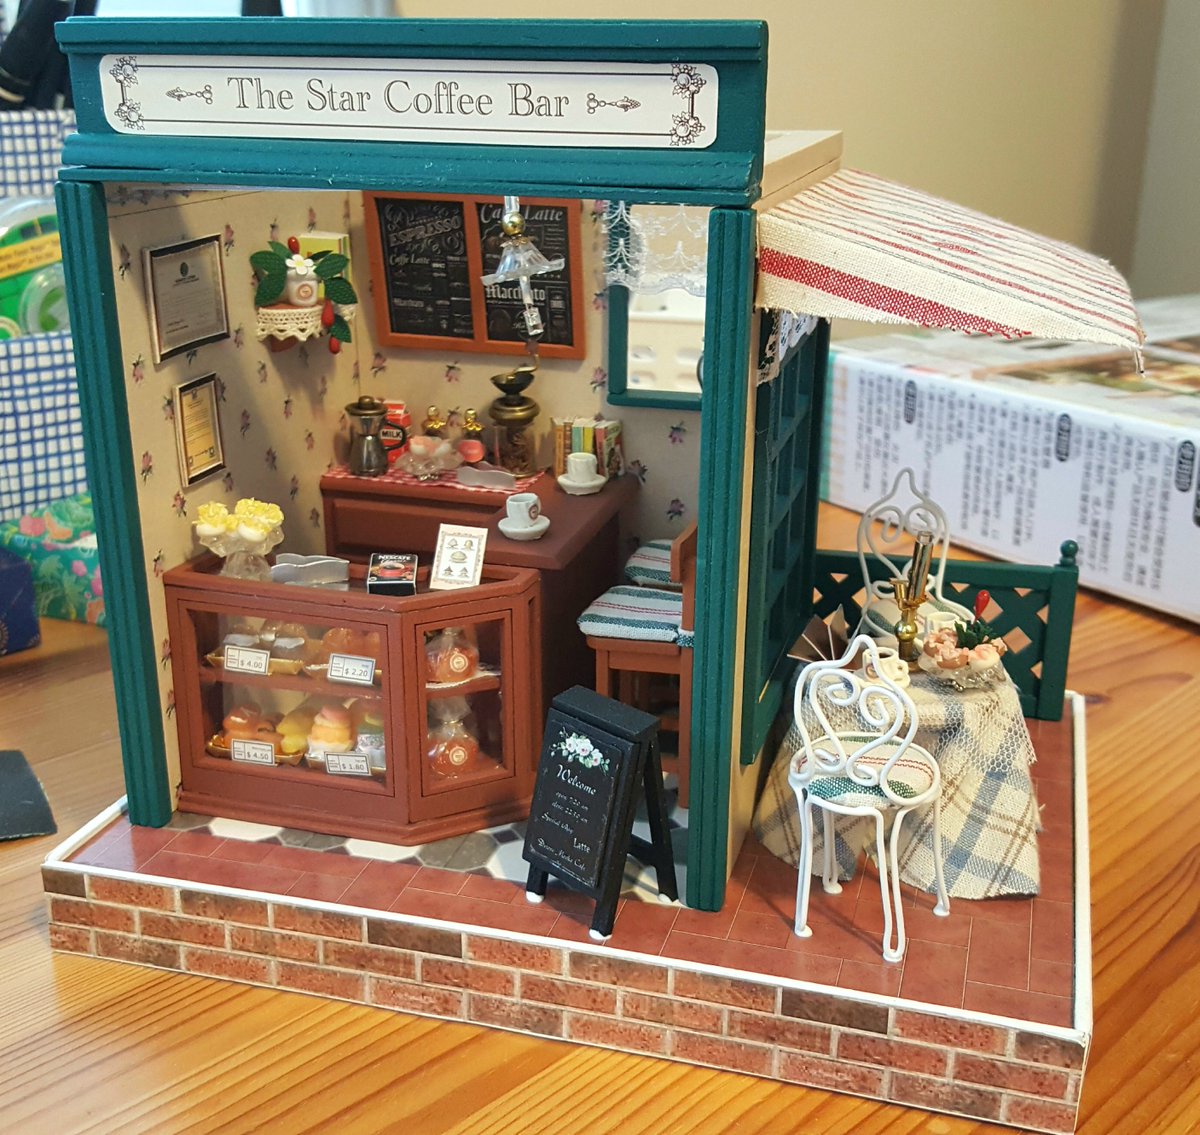 "The star coffee bar" lil café!!! Finally finished, the glue is still visible in some places since i just completed it moments before taking pics LOL most my other diys were homes but i wanted to do a shop one!! Love this one lots!!!